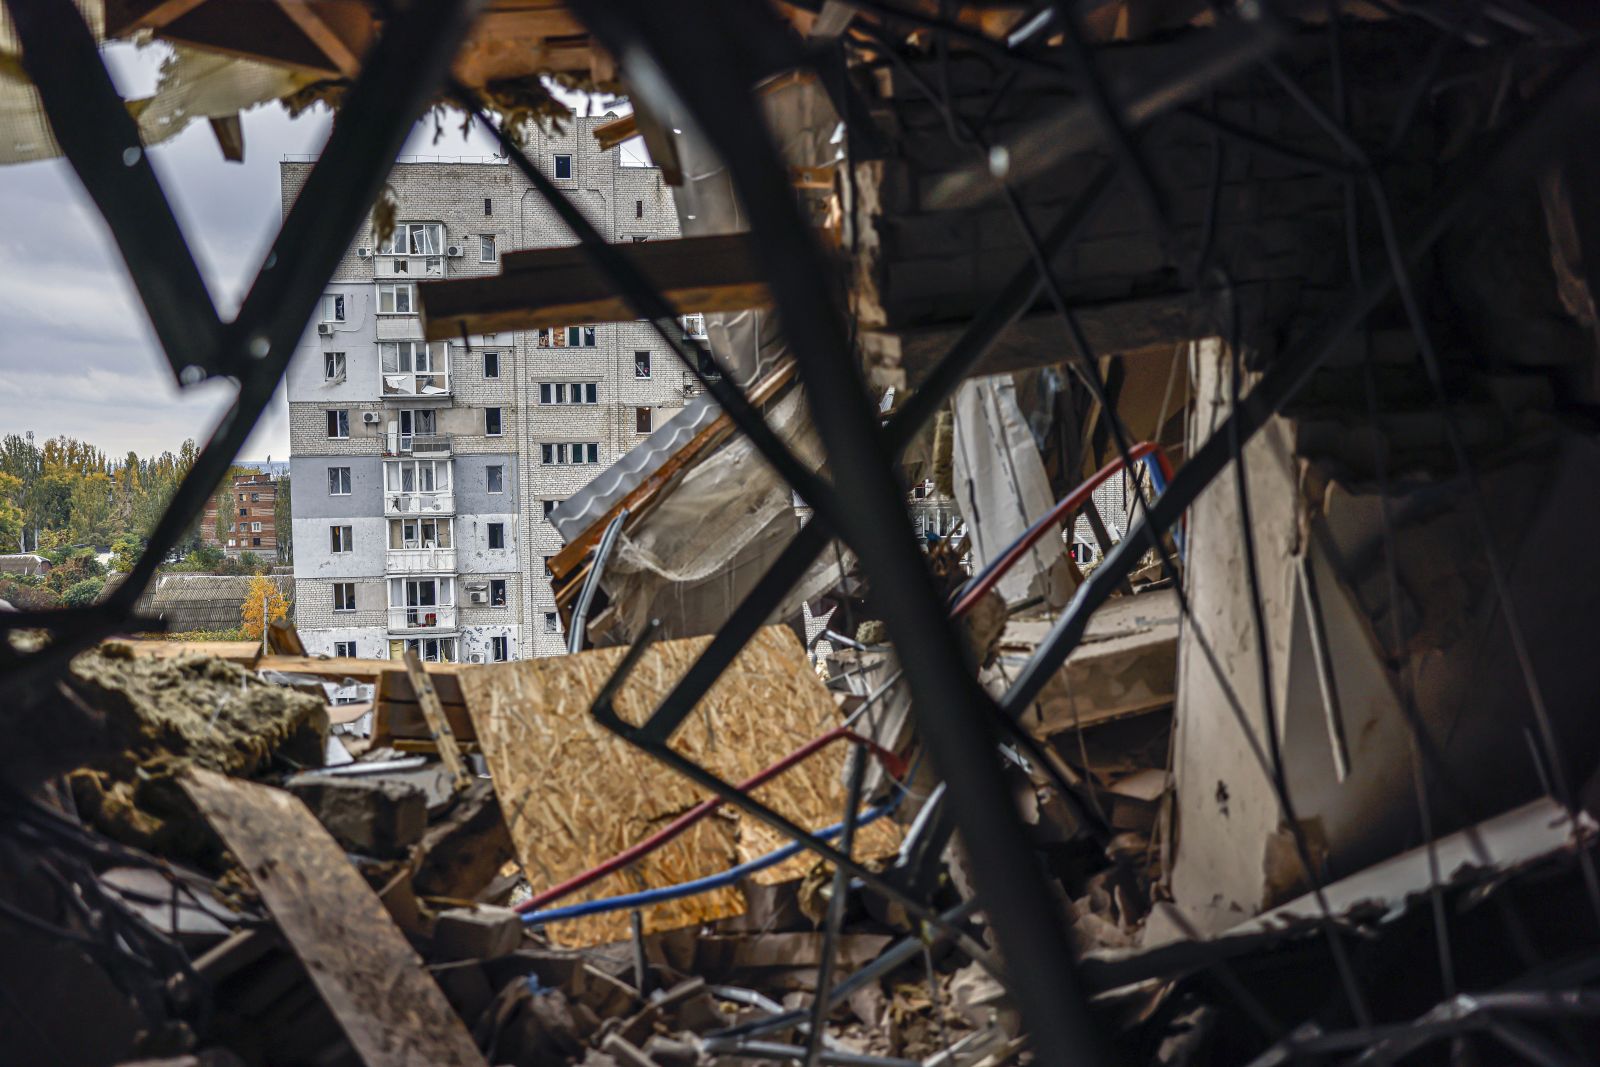 epa10260900 A damaged flat hit by shelling in Mykolaiv, southern Ukraine, 23 October 2022. Russian troops on 24 February entered Ukrainian territory, starting a conflict that has provoked destruction and a humanitarian crisis.  EPA/HANNIBAL HANSCHKE